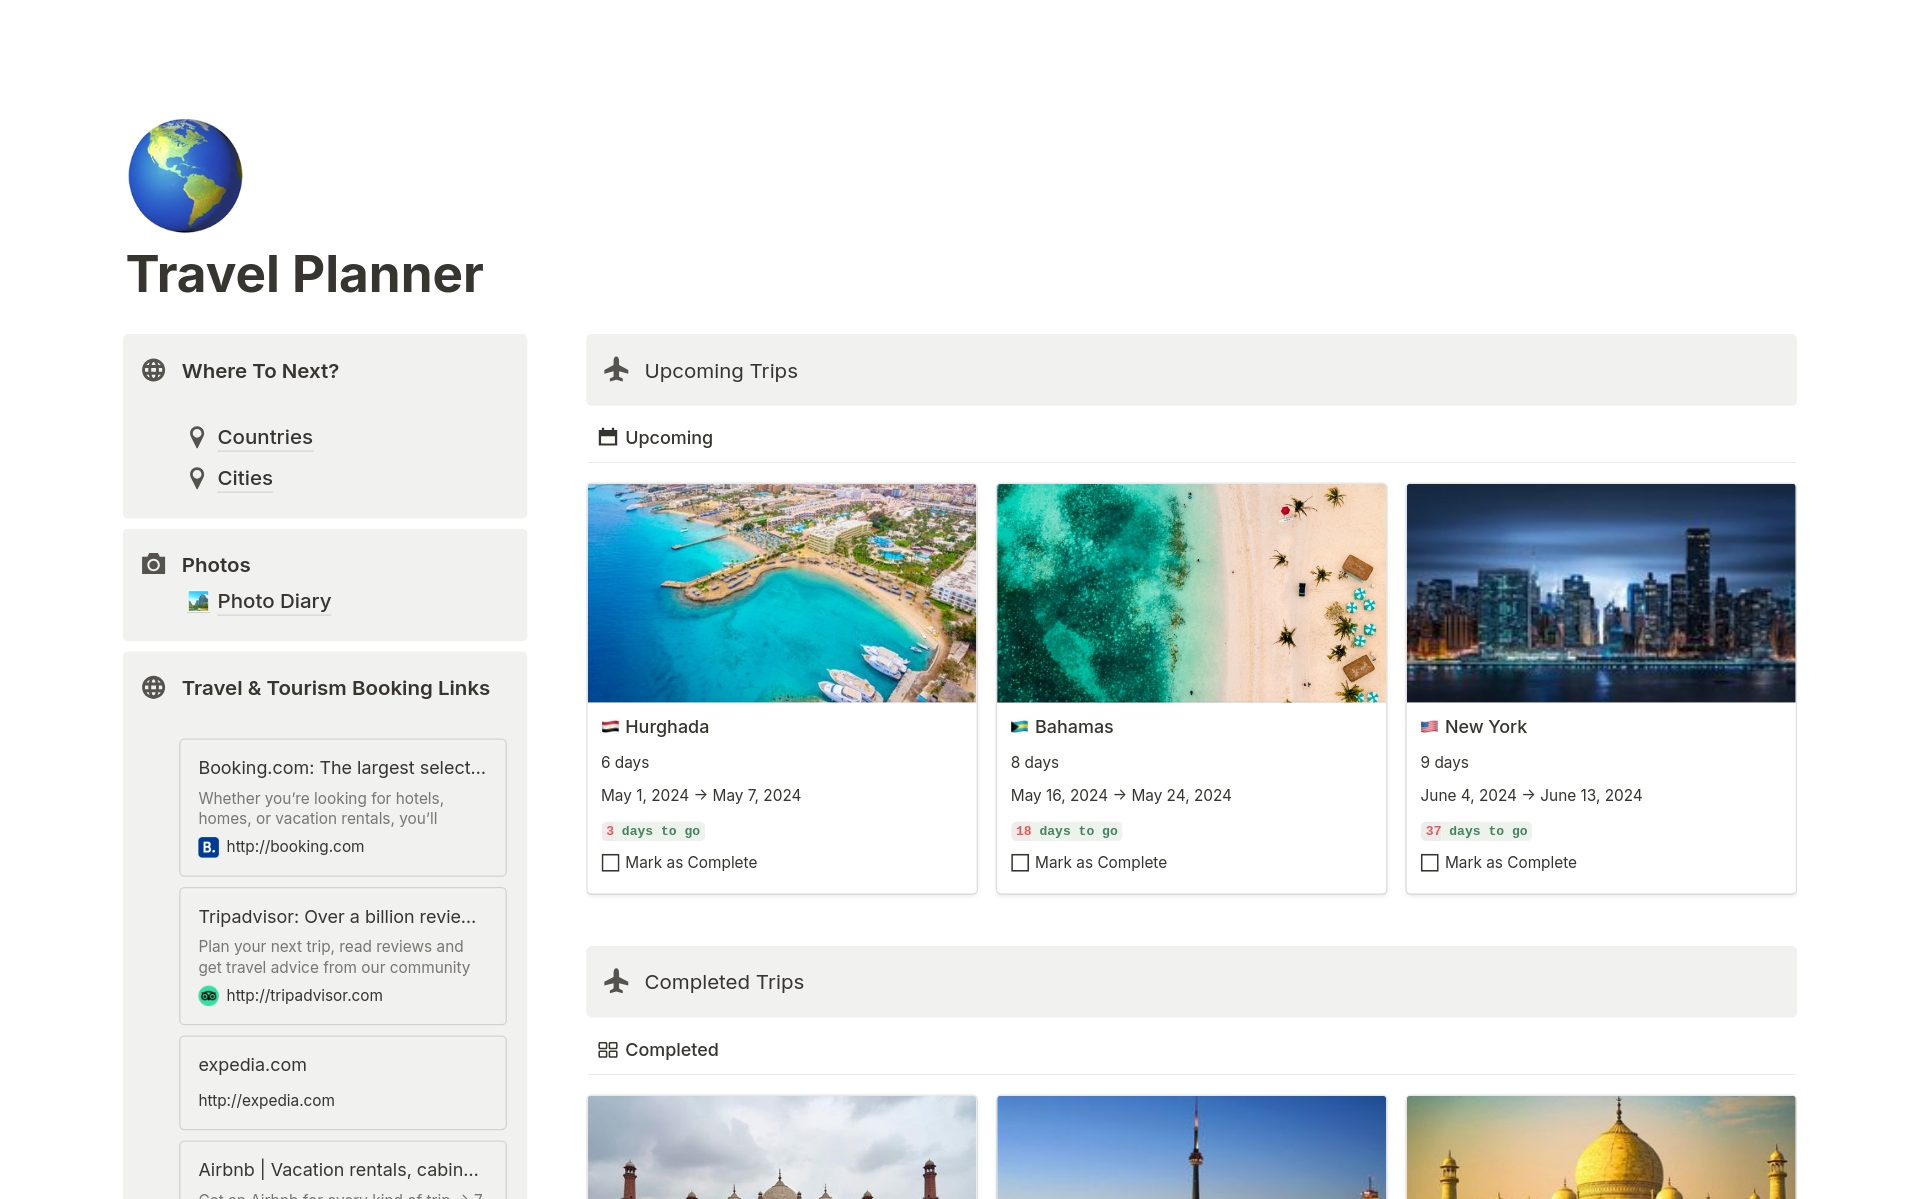 A template preview for Travel Planner